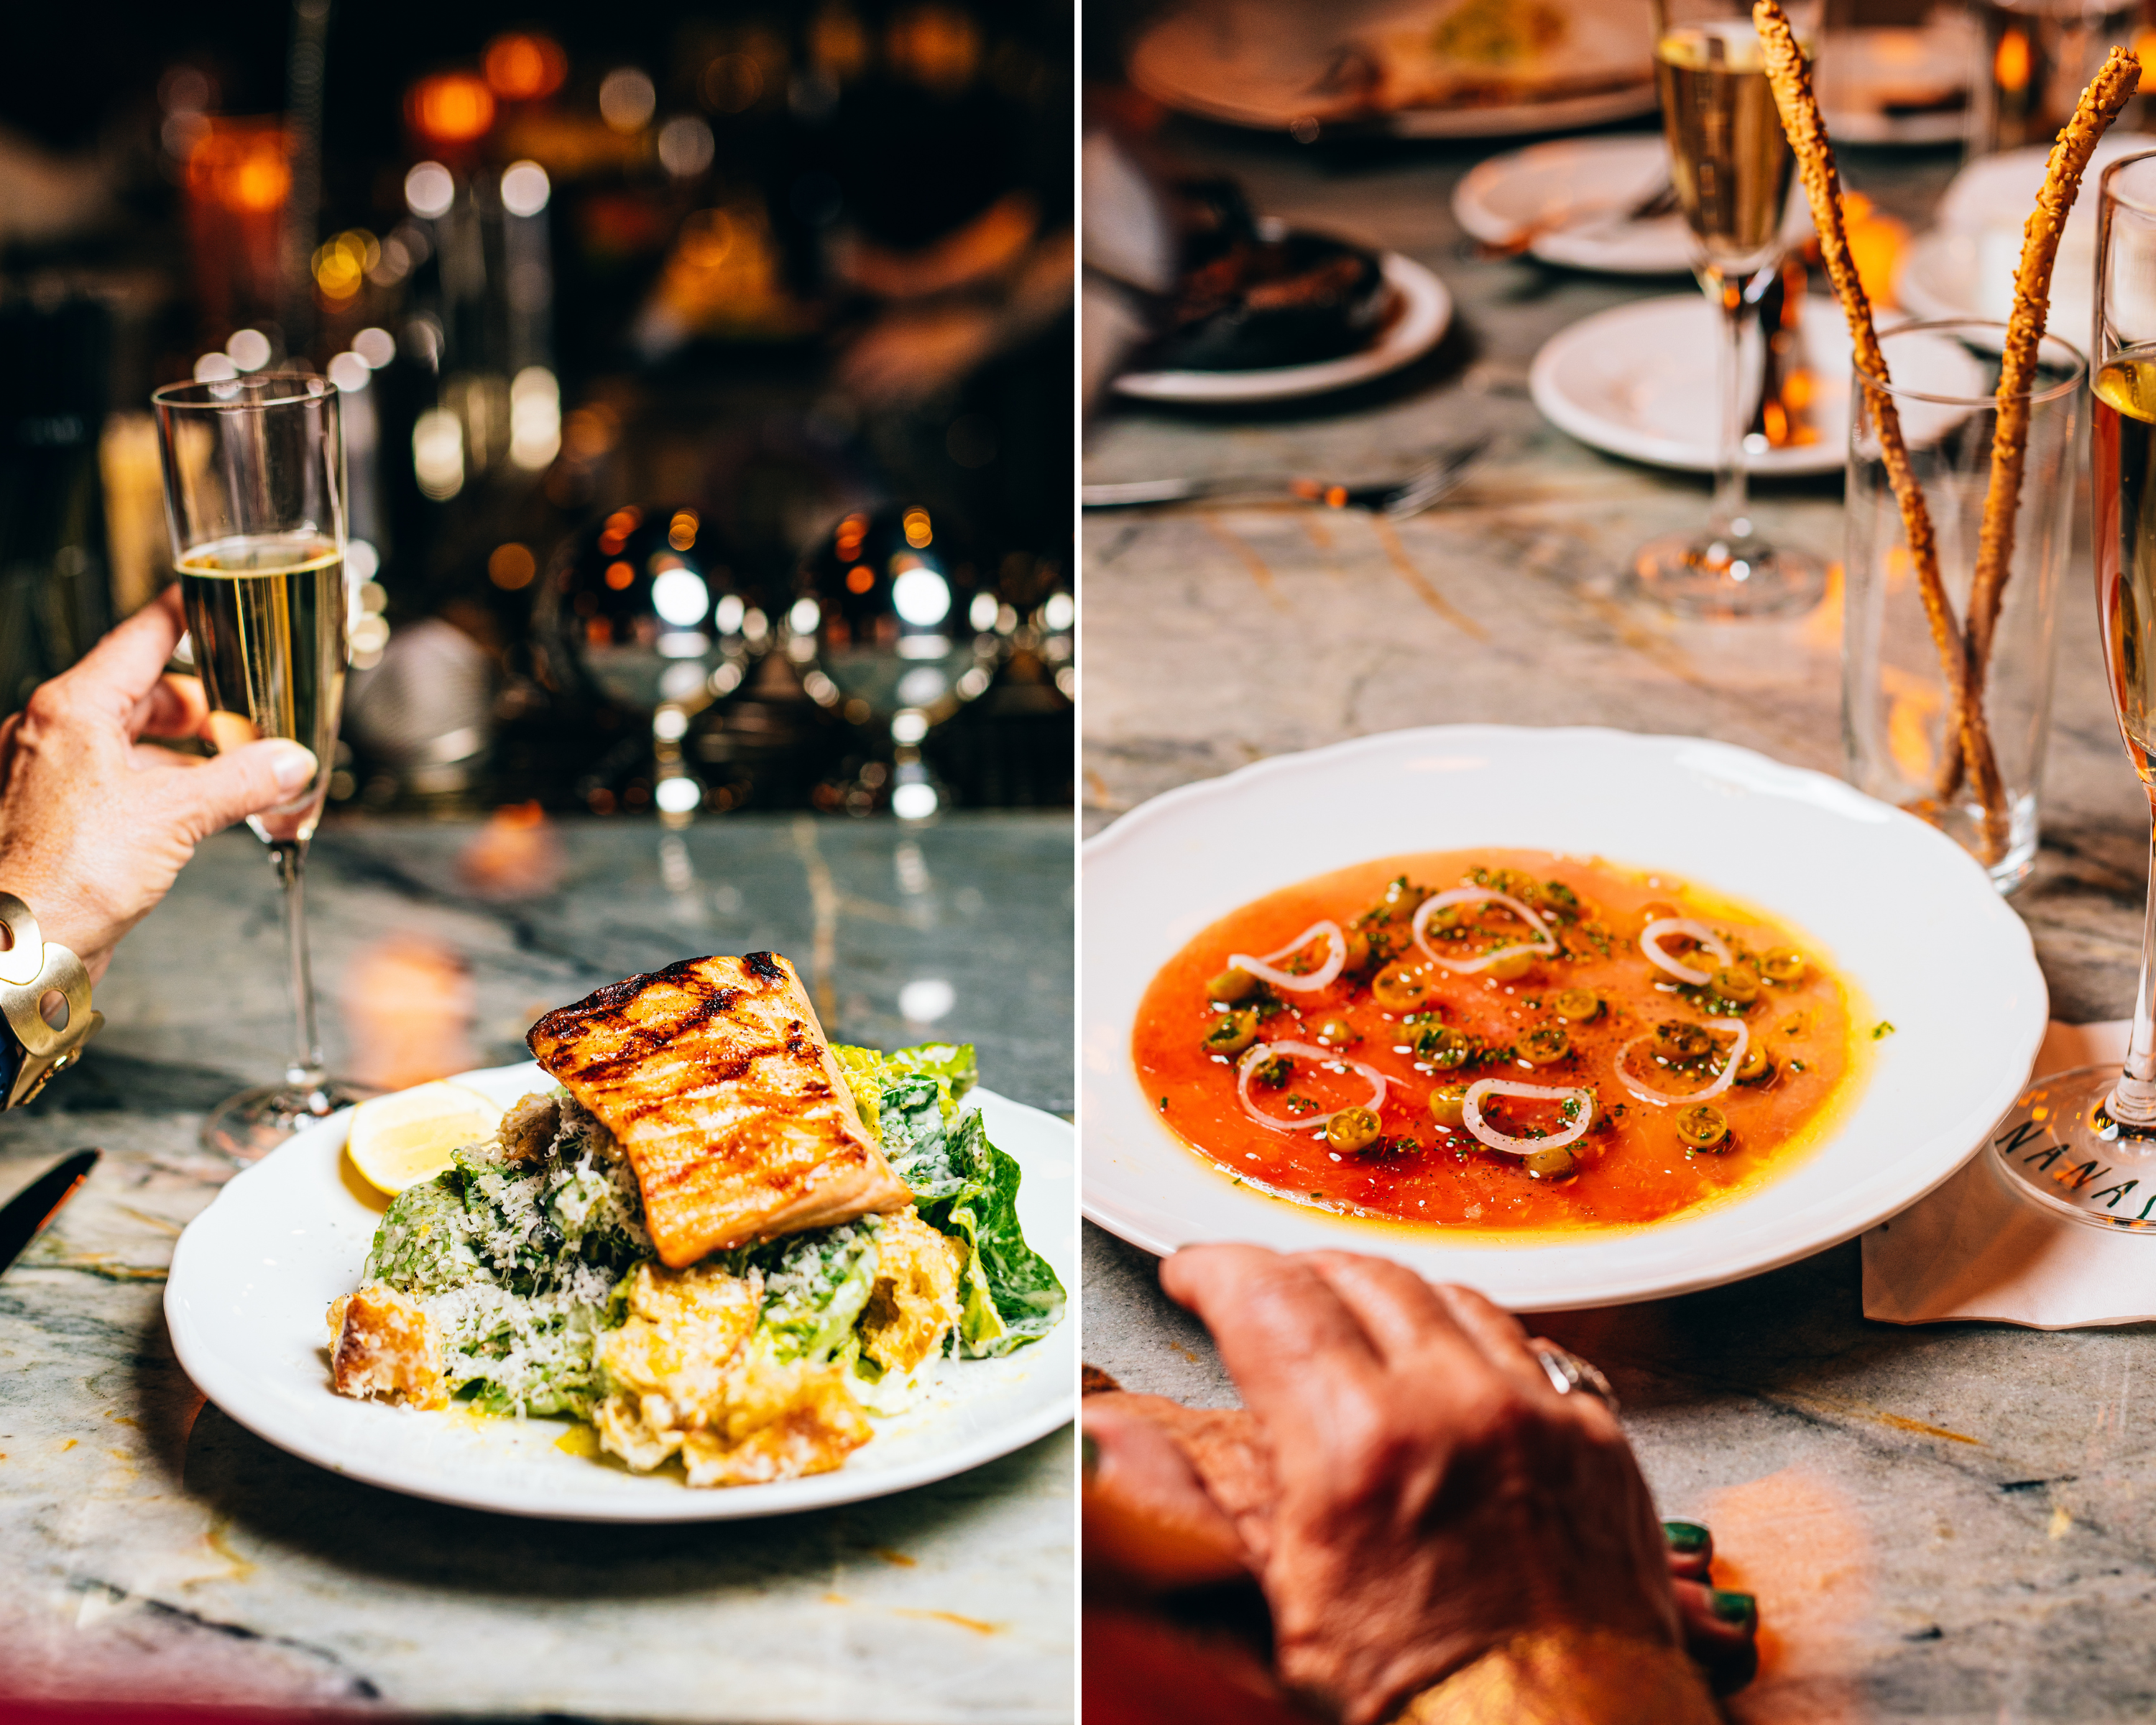 A collage of two imageS: Salmon caesar and yellowfin tuna carpaccio.